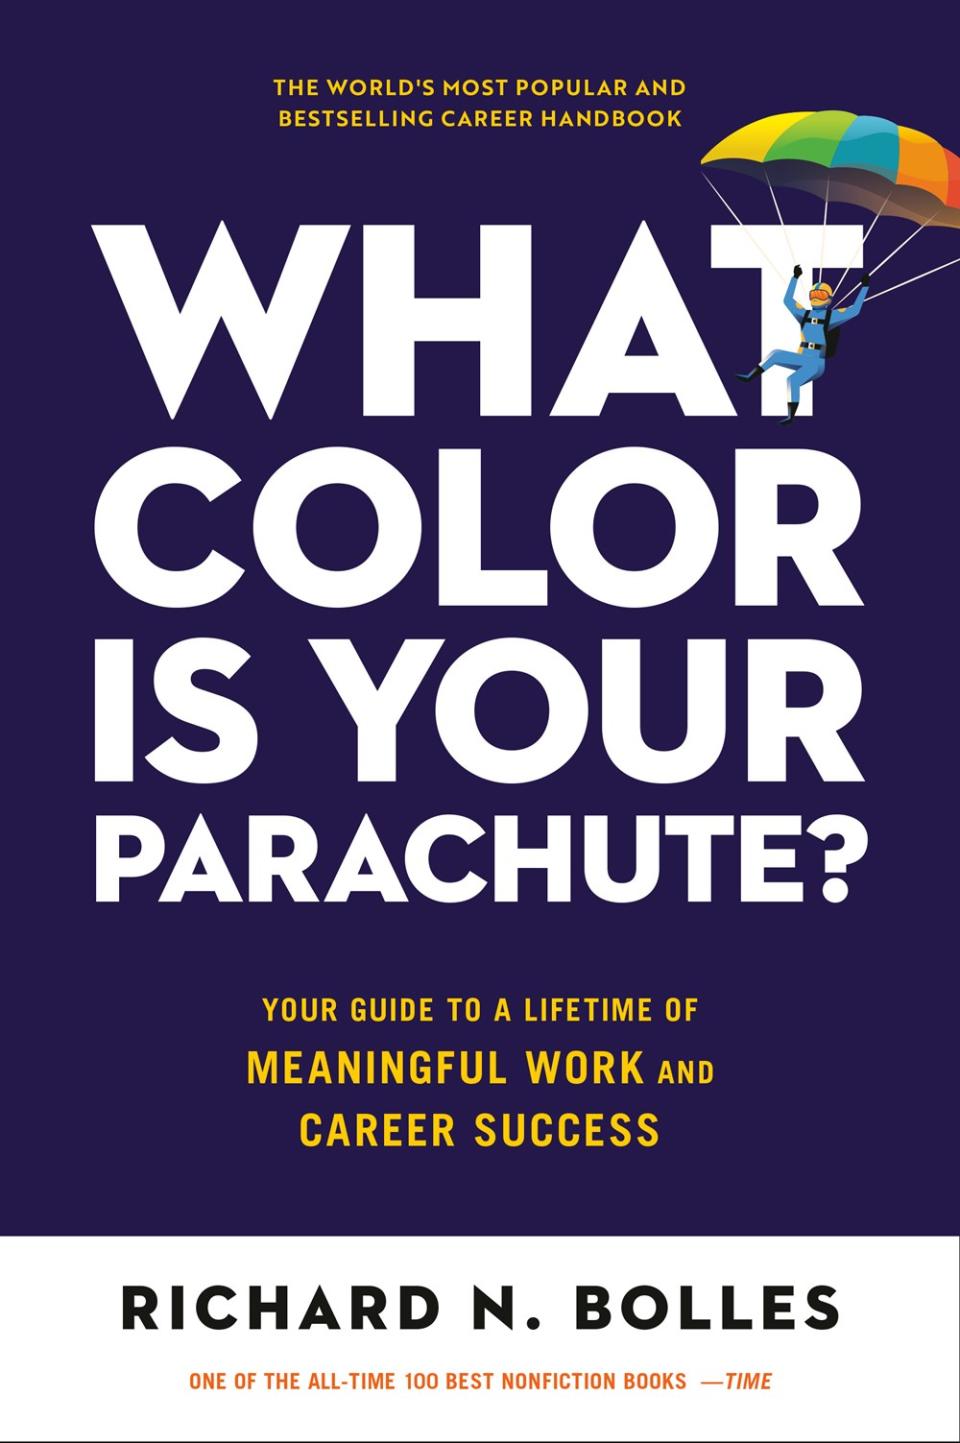 What Color is Your Parachute - New Years Resolution Books